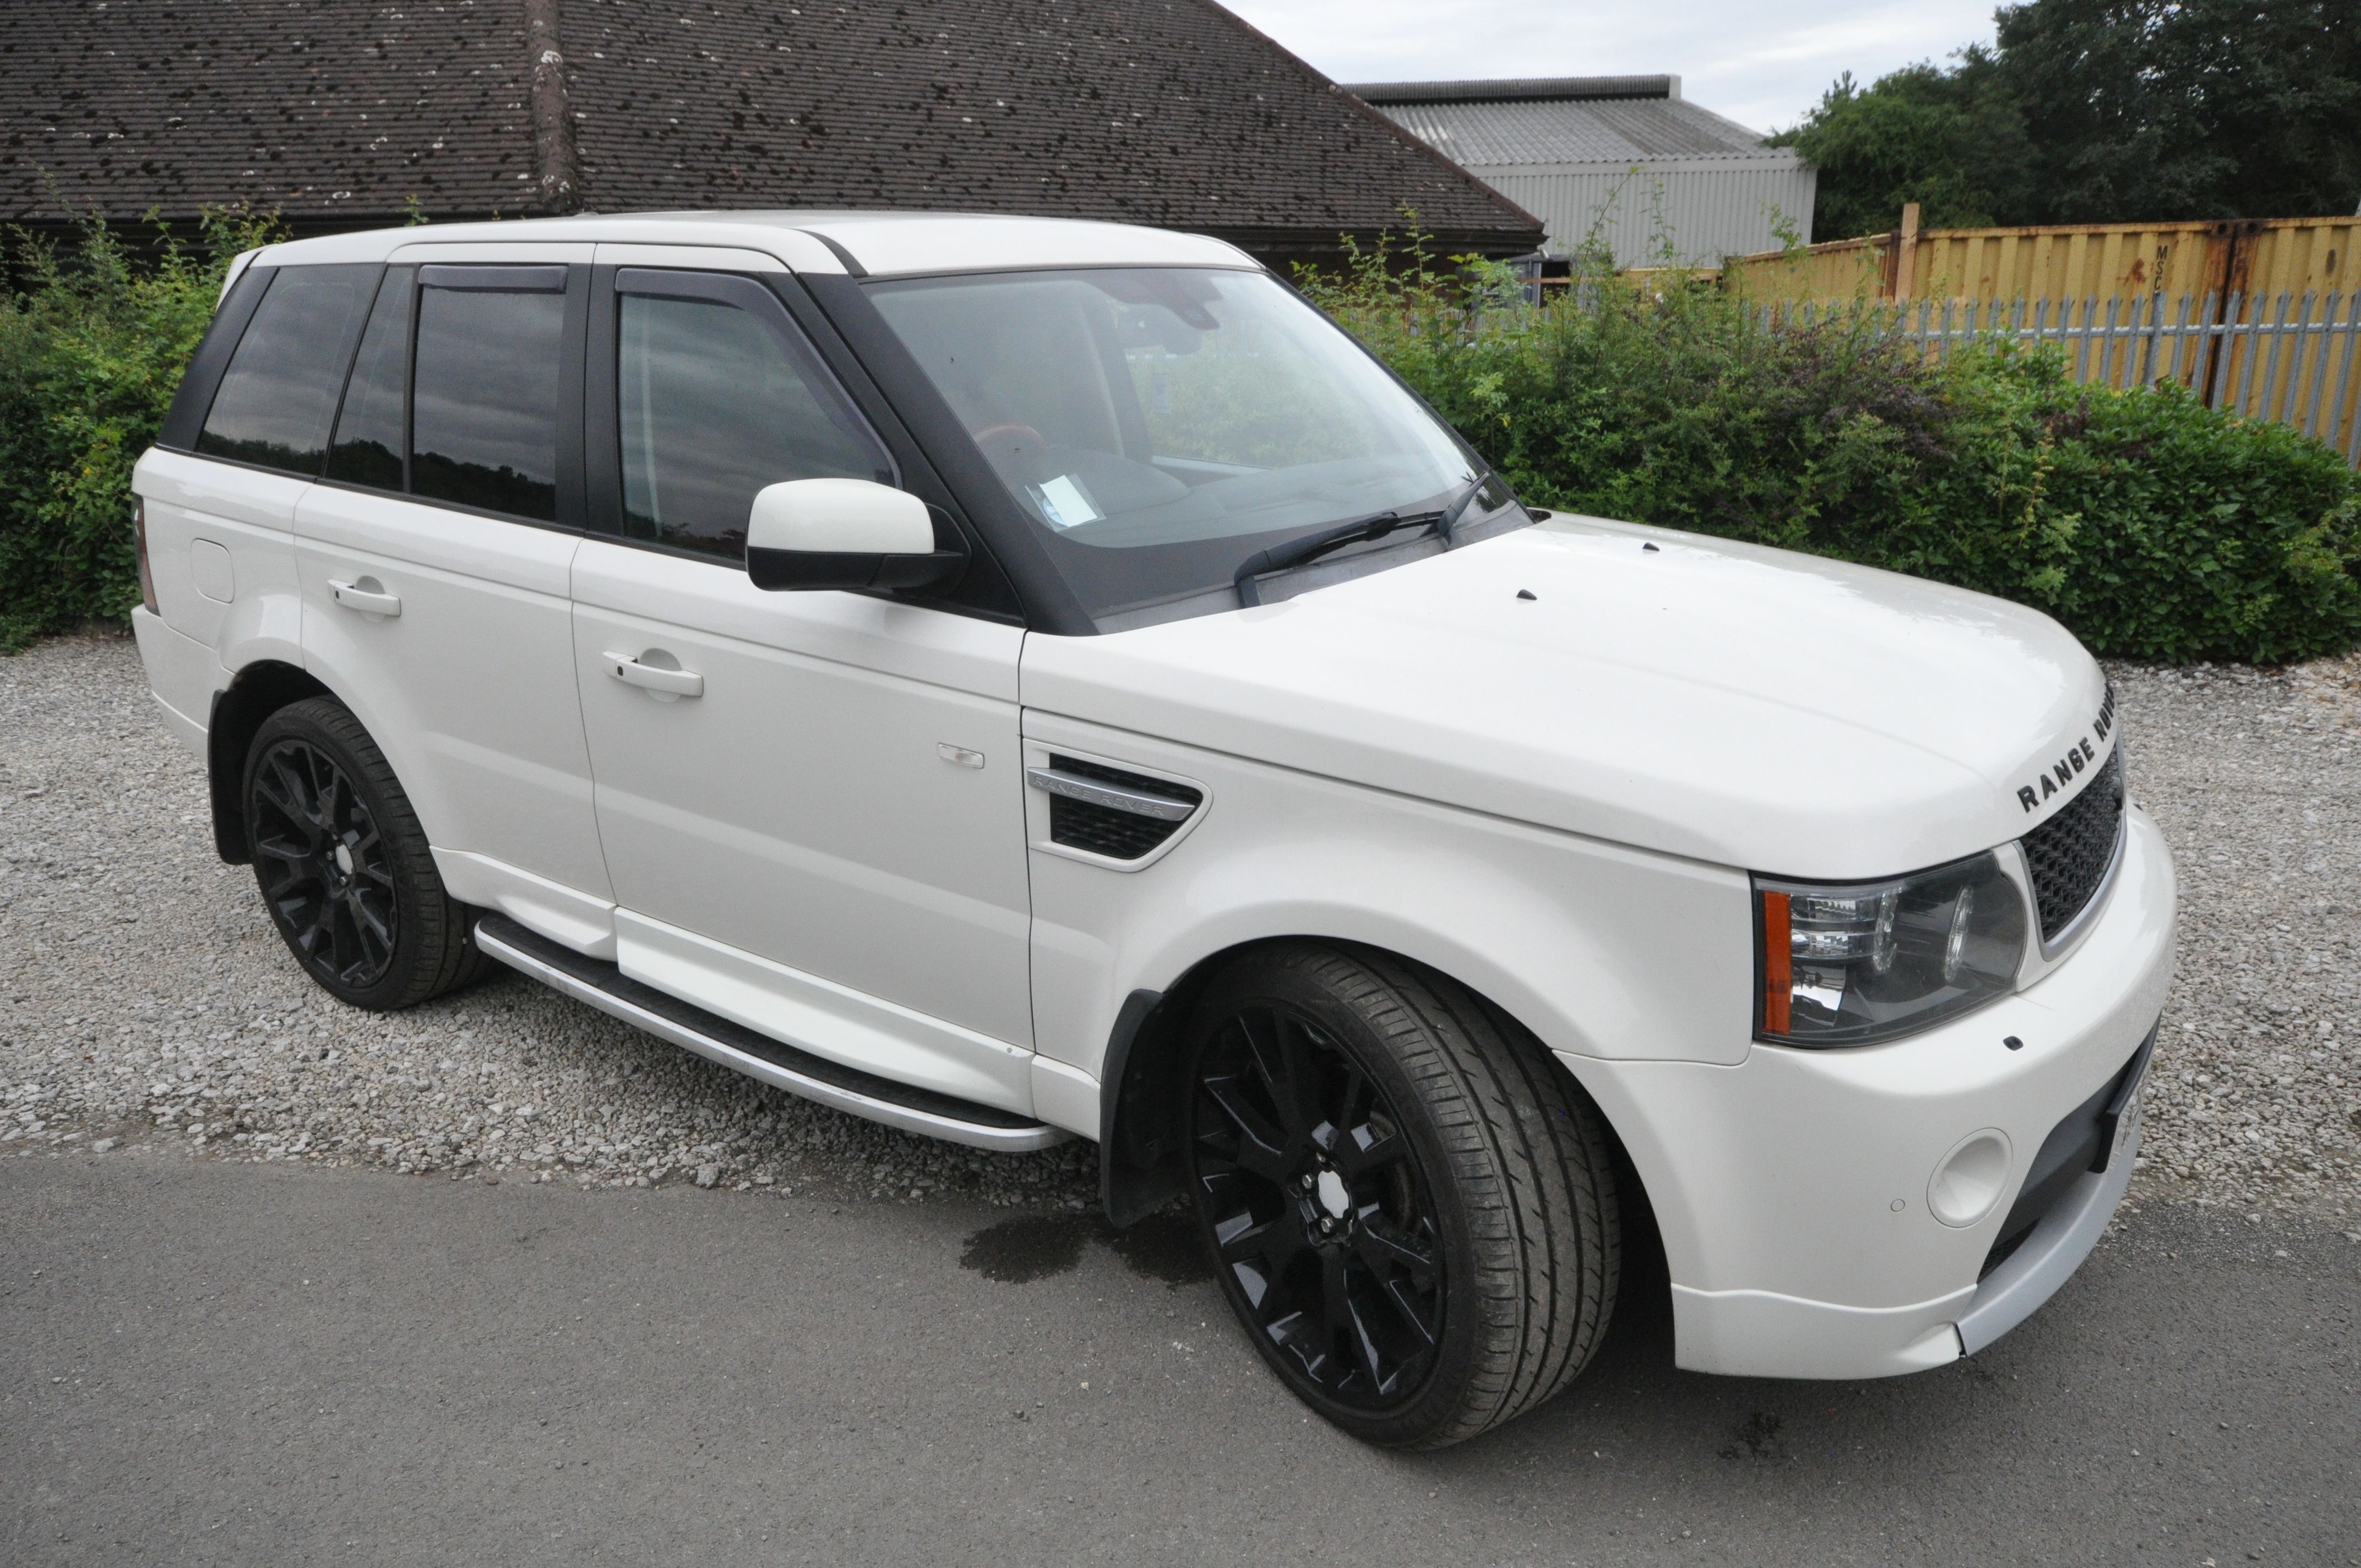 A 2010 RANGE ROVER SPORT - K9 OBP - This Range Rover Sport 3.6 TDV8 Autobiography Sport with